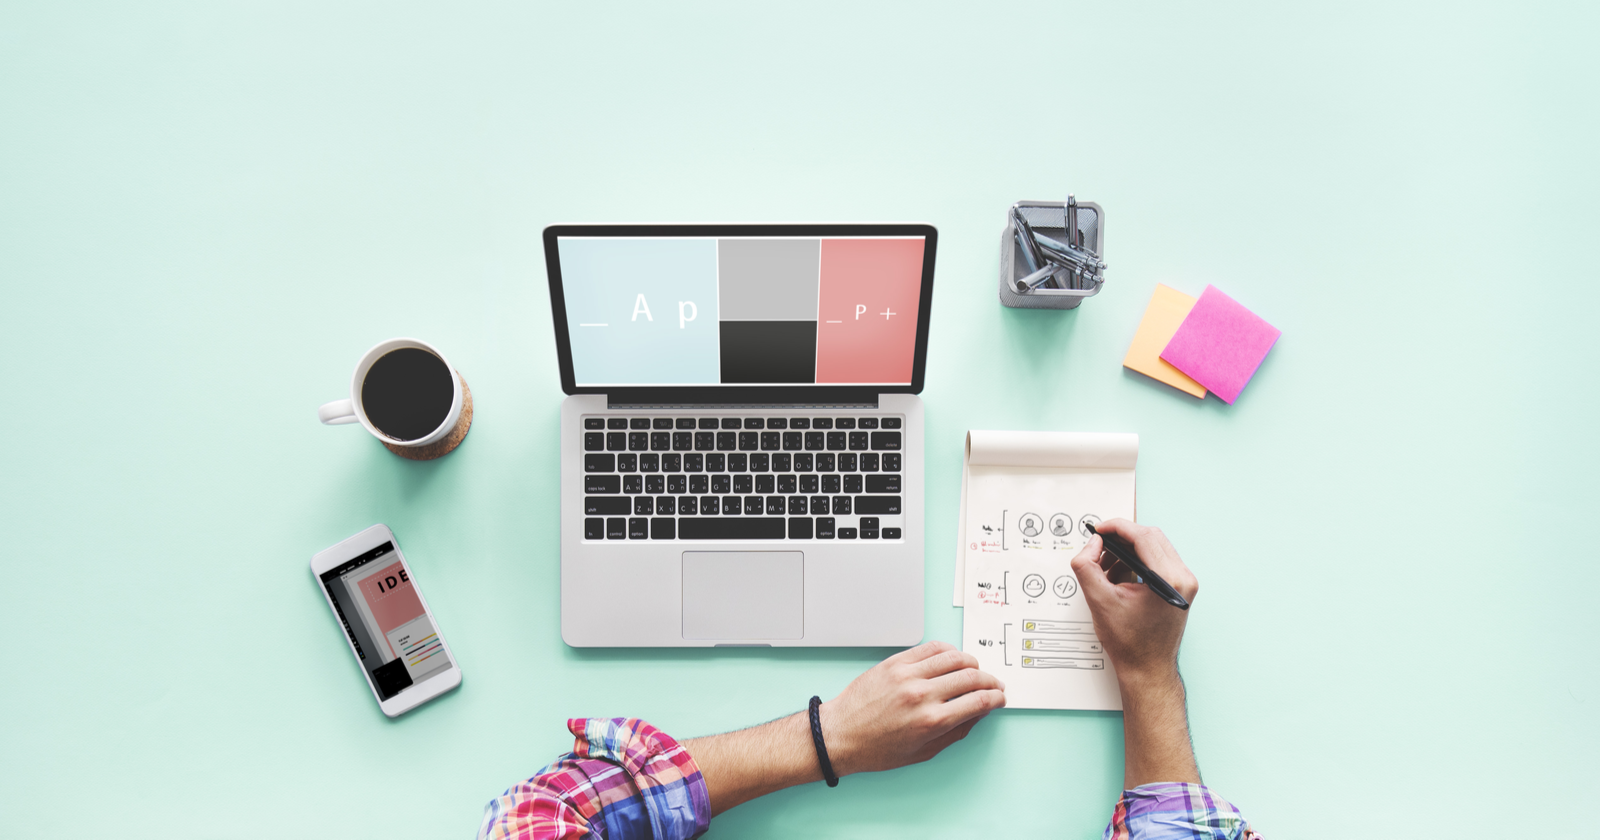 3 Tips to Master a Minimalistic Web Design to Boost Your Company’s Bottom Line